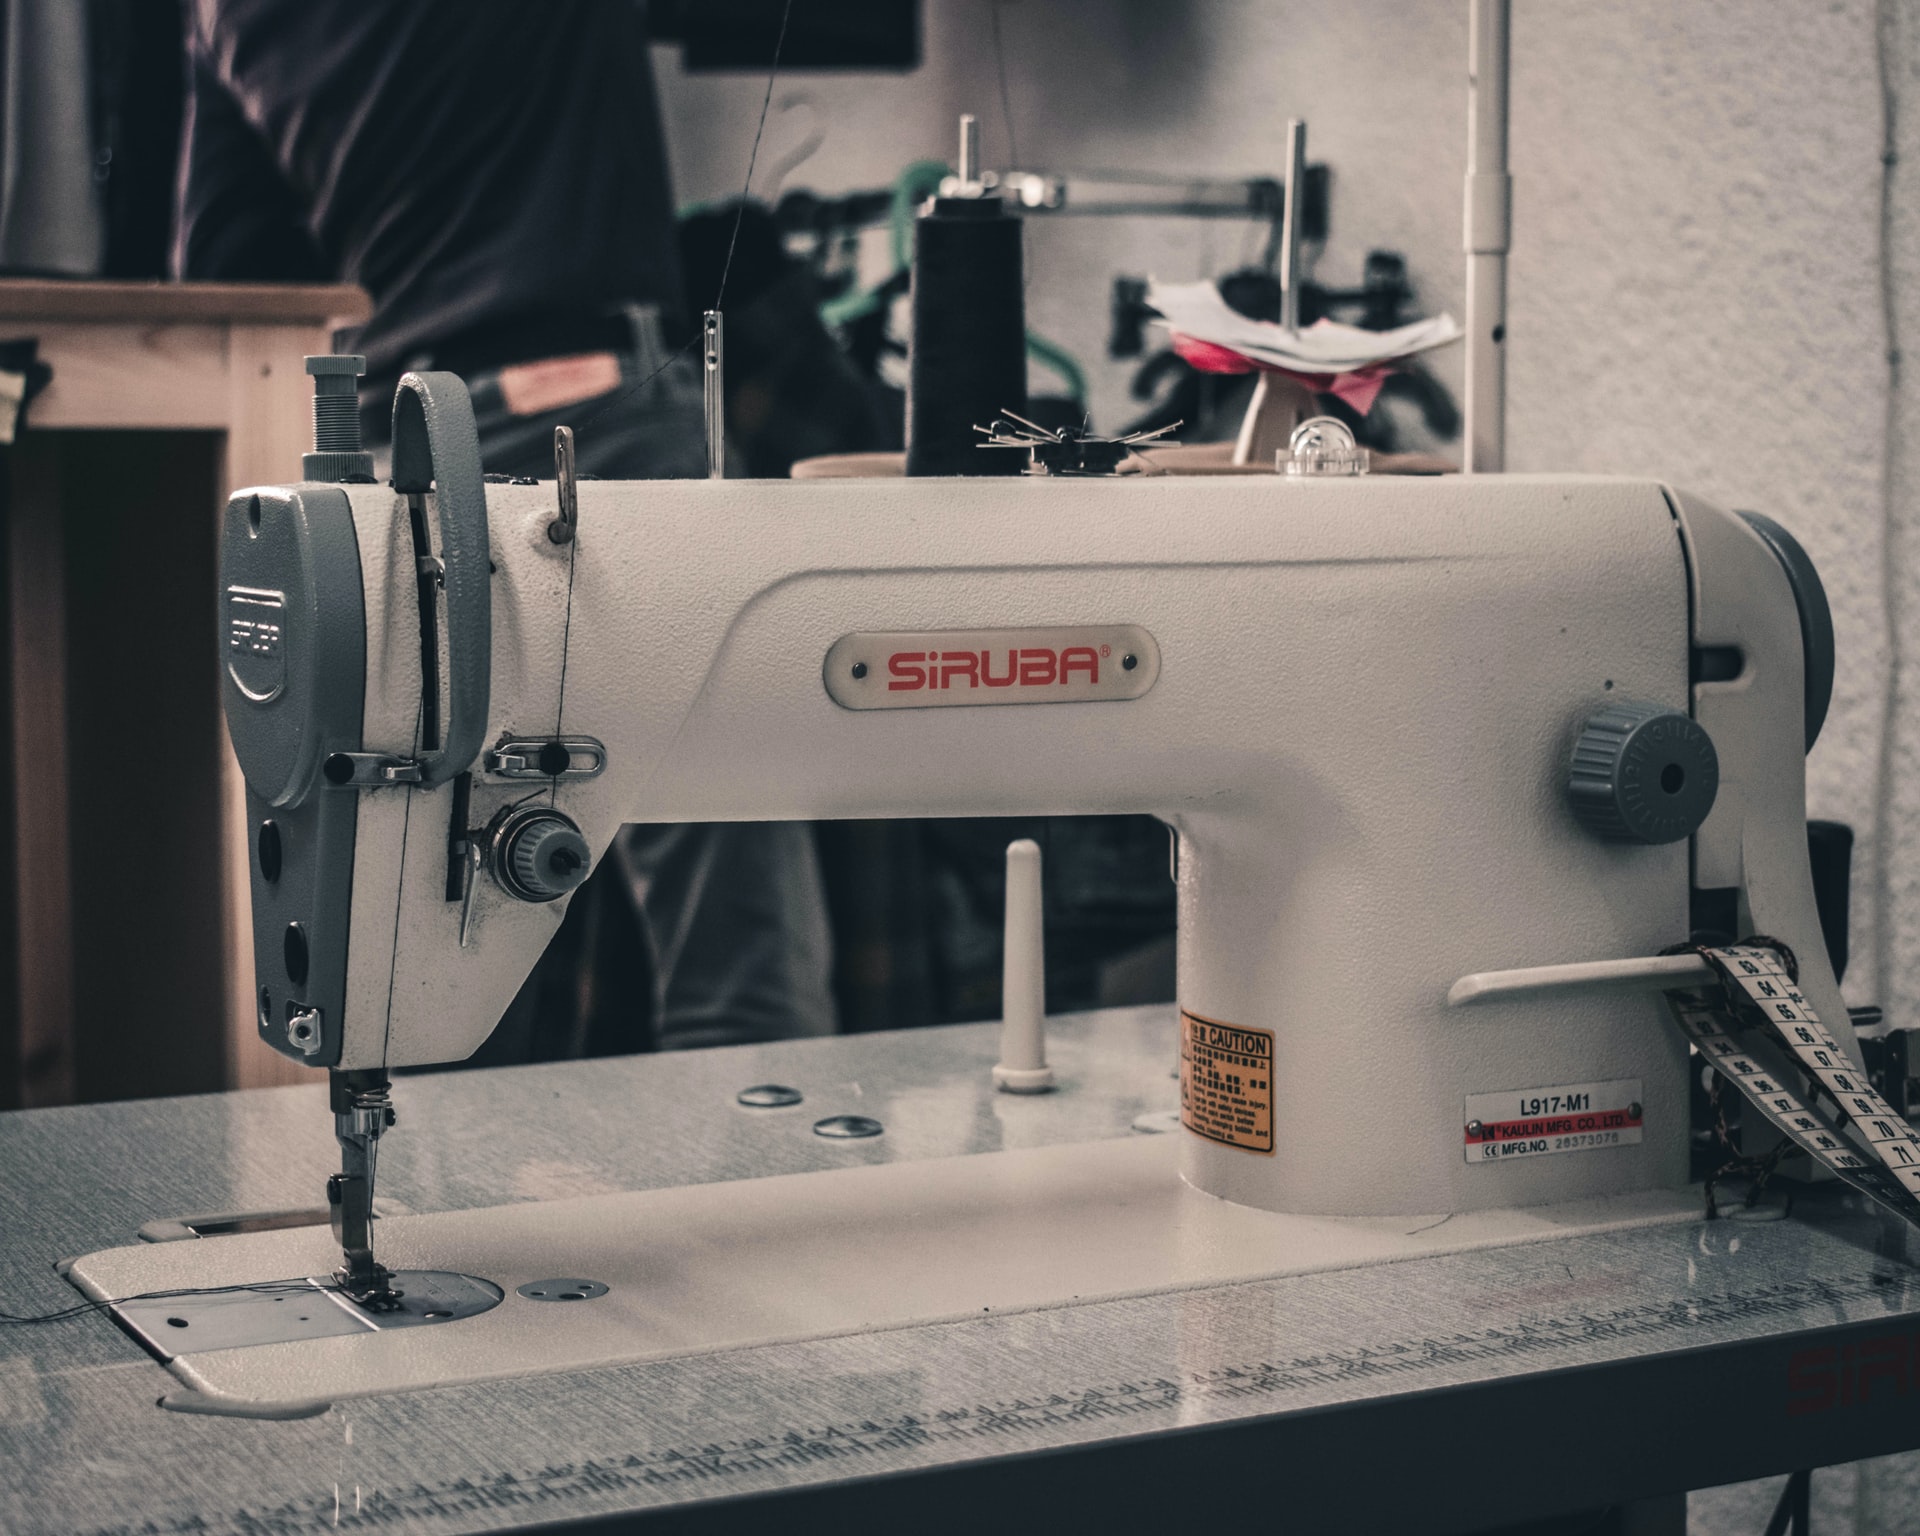 Singer, Janome, And Borther: The Best Sewing Machines For Leather